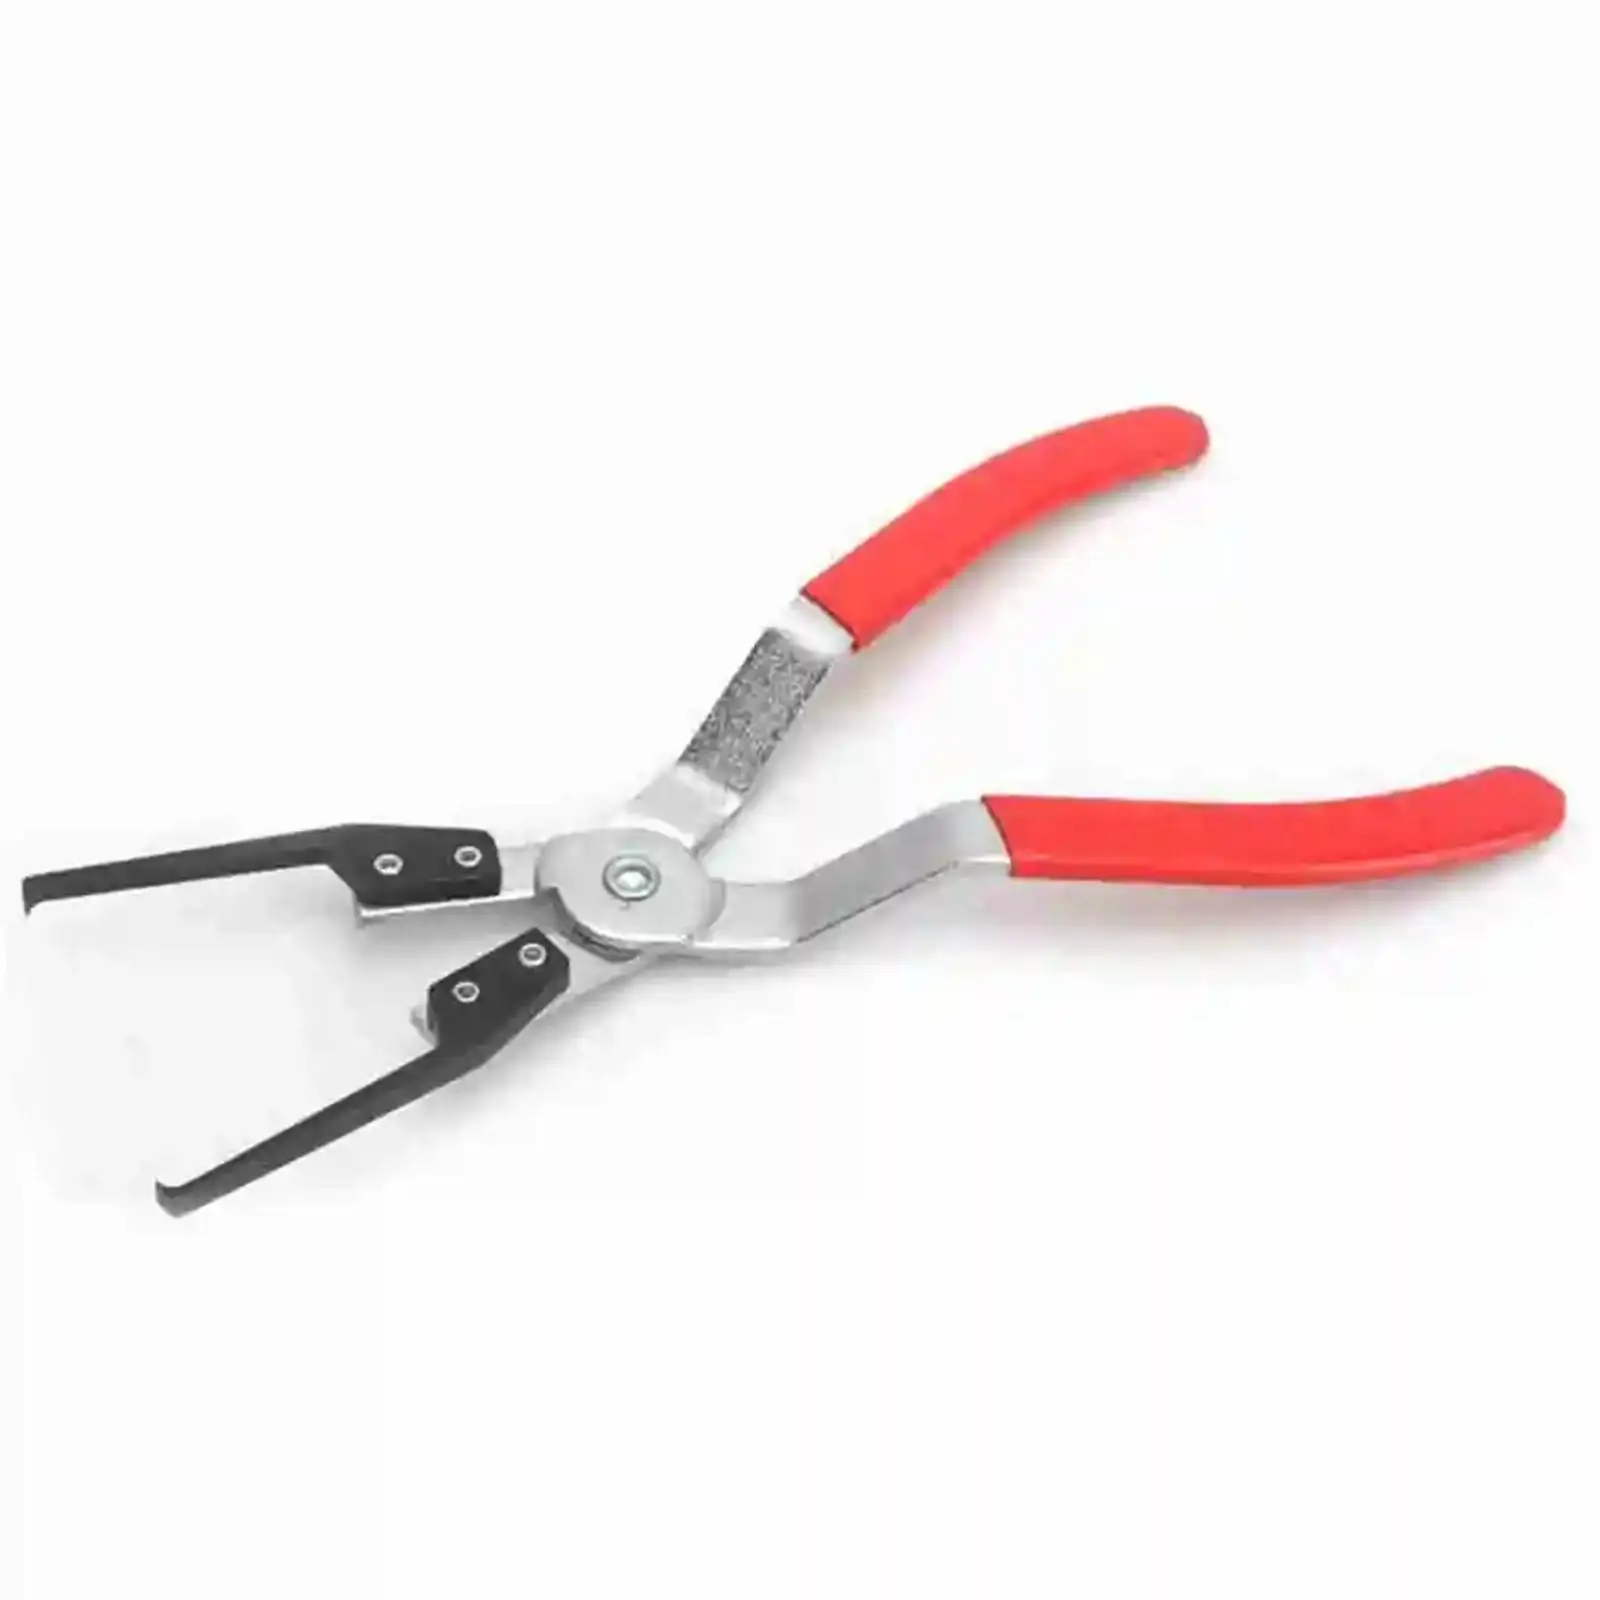 Generic Auto Relay Puller Plier Fuse Remover Tool Car Relay Comfortable Grip Automotive Universal Pliers Portable Relay Clamp